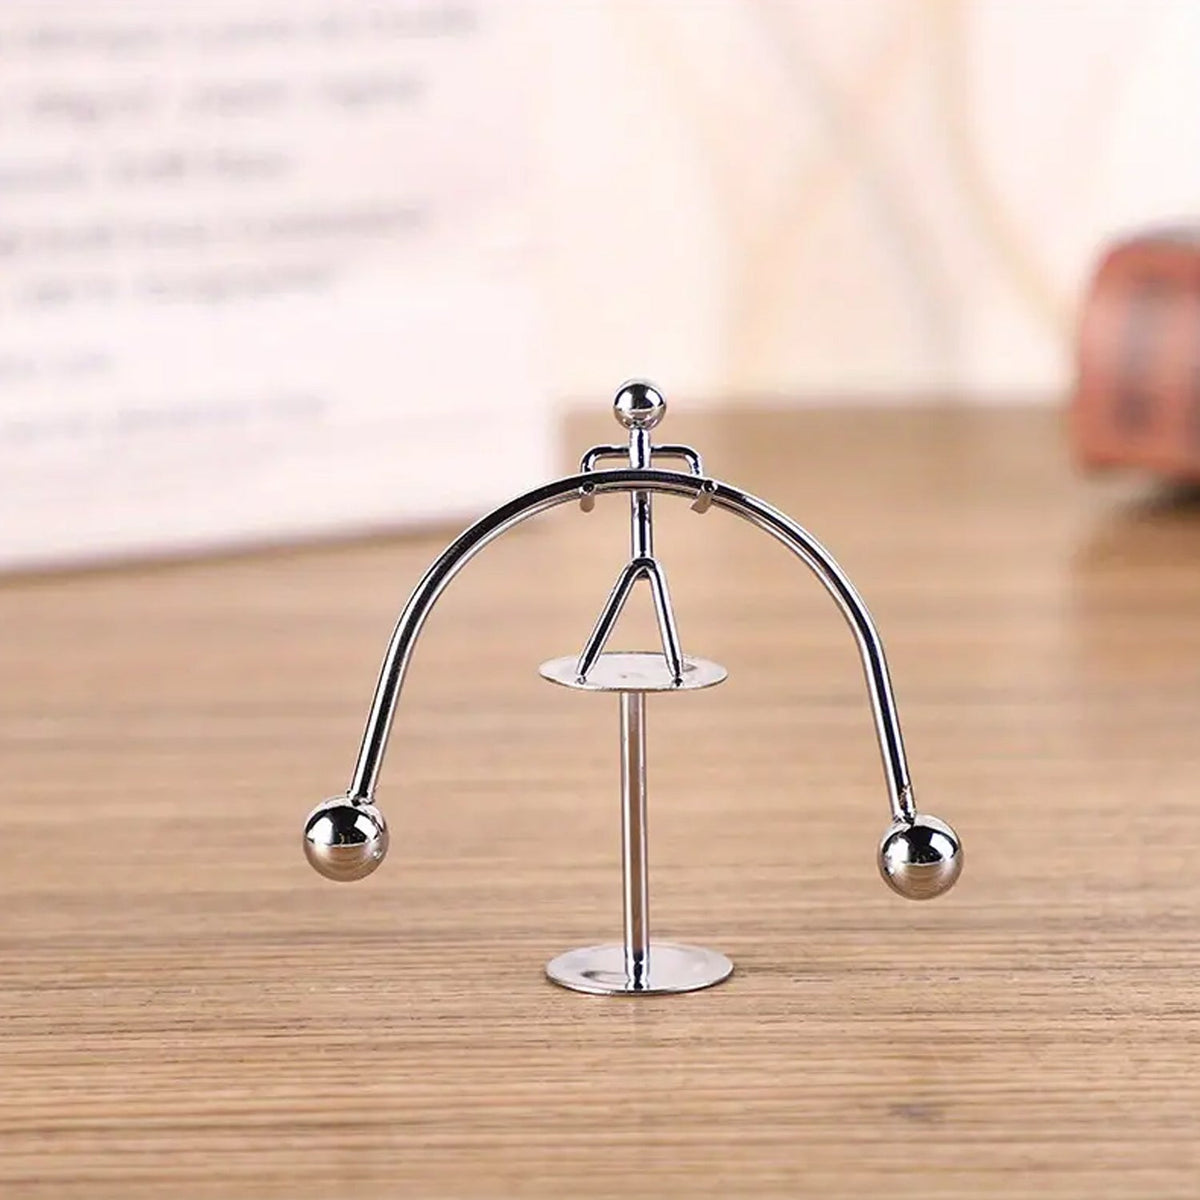 7850 Mini Steel Balance Toy, Small Weightlifter Mold Desk Decor Metal Craft Perpetual Balance Art Education Motion Toy Figurine Home Office Decoration Birthday Gift (1 Pc)